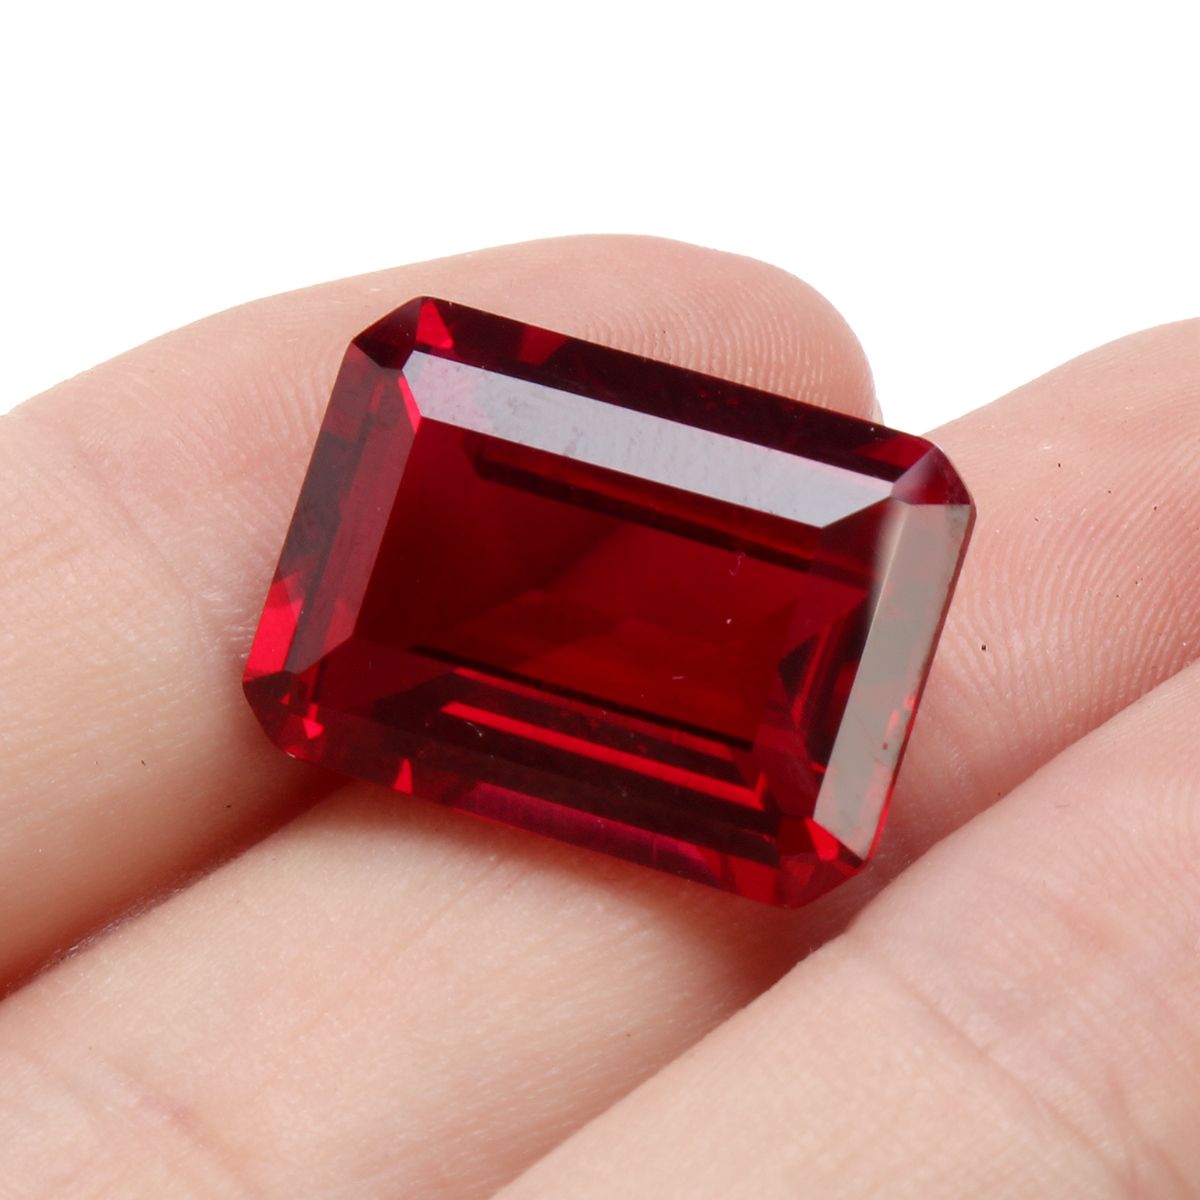 13x18mm-Unheated-Rectangular-SHape-Pigeon-Blood-Red-Ruby-Cut-Loose-Gems-Home-Decorations-1472780